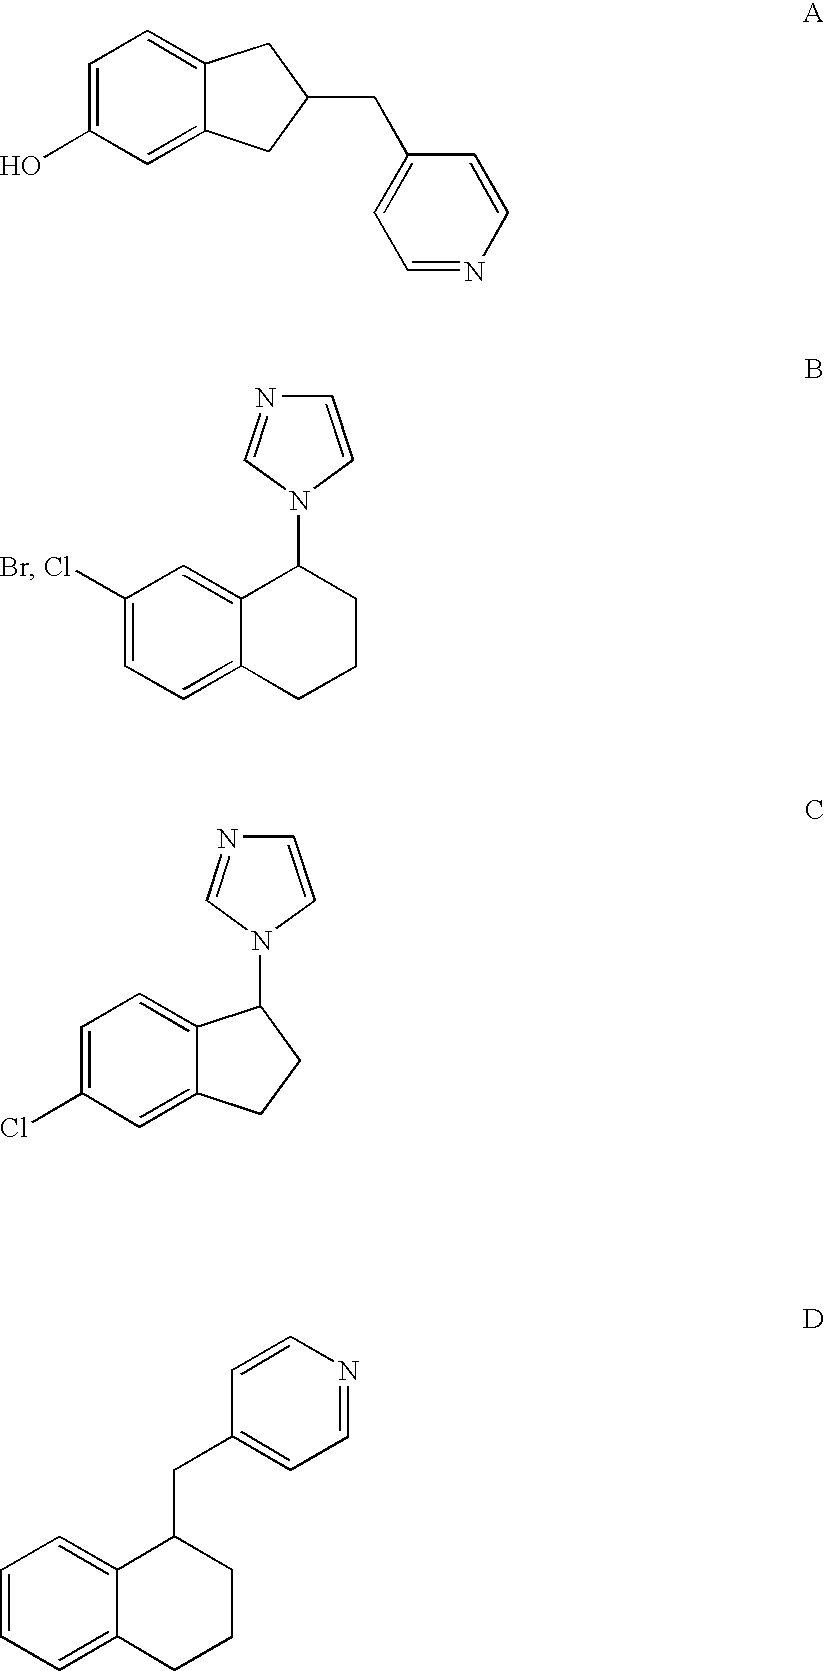 Selective Inhibitors of Human Corticosteroid Synthases